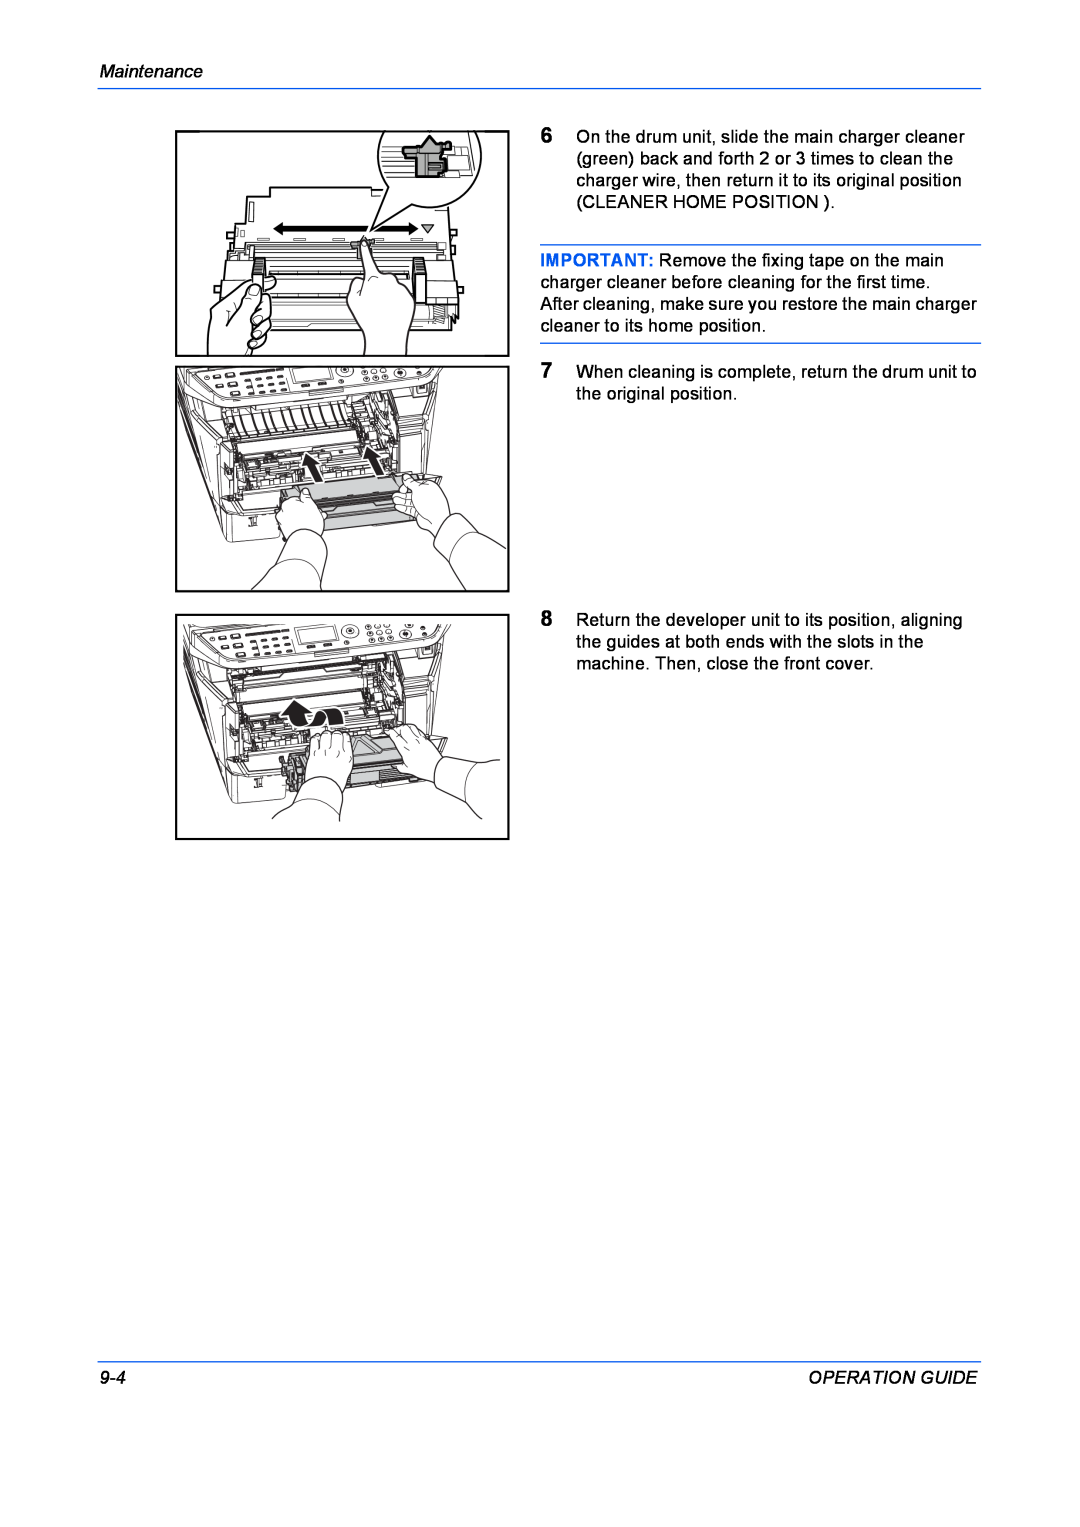 Kyocera FS-1028MFP, FS-1128MFP manual Maintenance, Cleaner Home Position, Operation Guide 